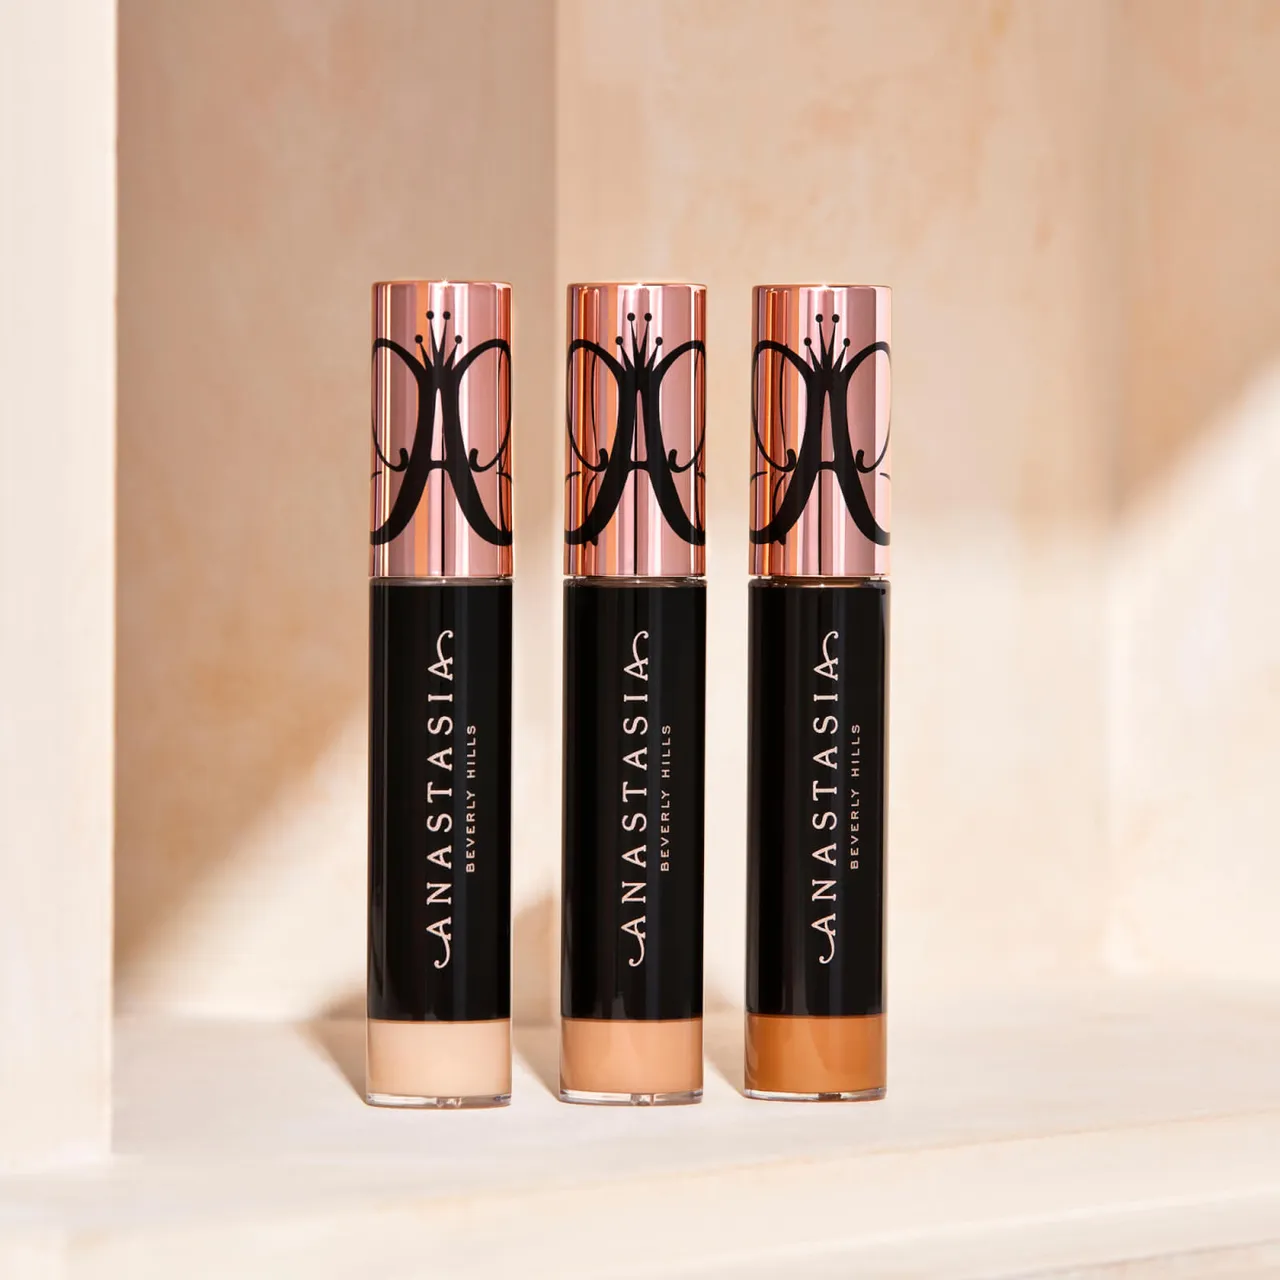 Anastasia Beverly Hills Magic Touch Concealer 12ml (Various Shades) - 18